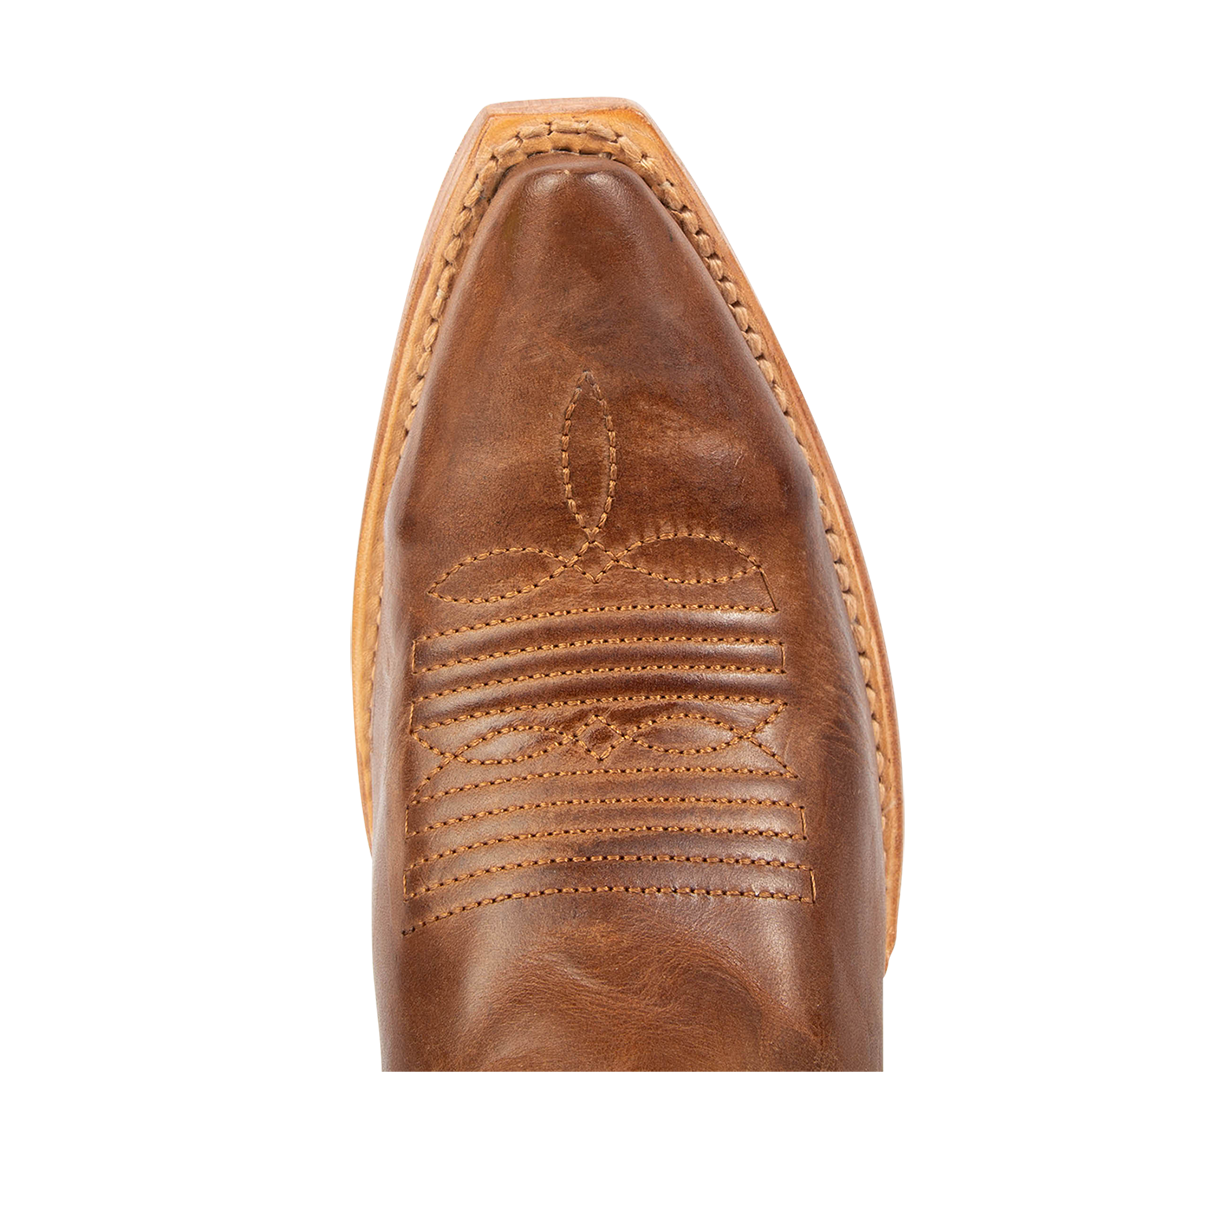 Top view showing snip toe construction with stitch detailing on FREEBIRD women's Woodland tan leather boot